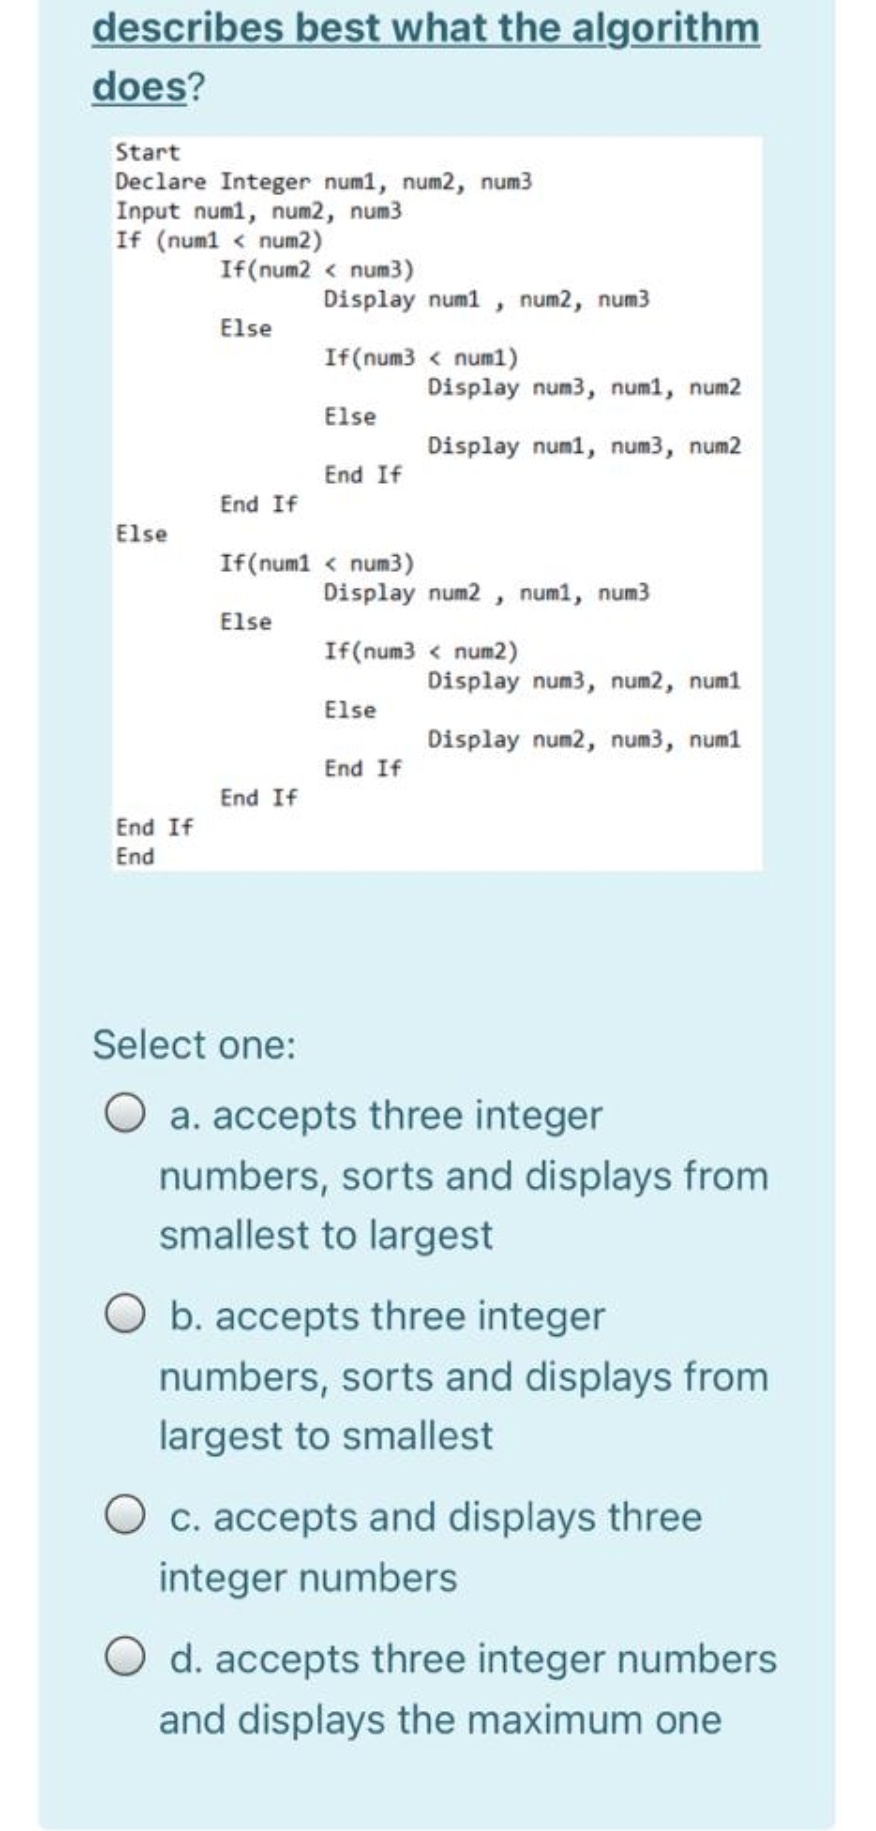 describes best what the algorithm
does?
Start
Declare Integer num1, num2, num3
Input numl, num2, num3
If (num1 < num2)
If(num2 < num3)
Display num1 , num2, num3
Else
If(num3 < num1)
Display num3, num1, num2
Else
Display num1, num3, num2
End If
End If
Else
If(num1 < num3)
Display num2 , num1, num3
Else
If(num3 < num2)
Display num3, num2, num1
Else
Display num2, num3, num1
End If
End If
End If
End
Select one:
a. accepts three integer
numbers, sorts and displays from
smallest to largest
O b. accepts three integer
numbers, sorts and displays from
largest to smallest
c. accepts and displays three
integer numbers
d. accepts three integer numbers
and displays the maximum one
